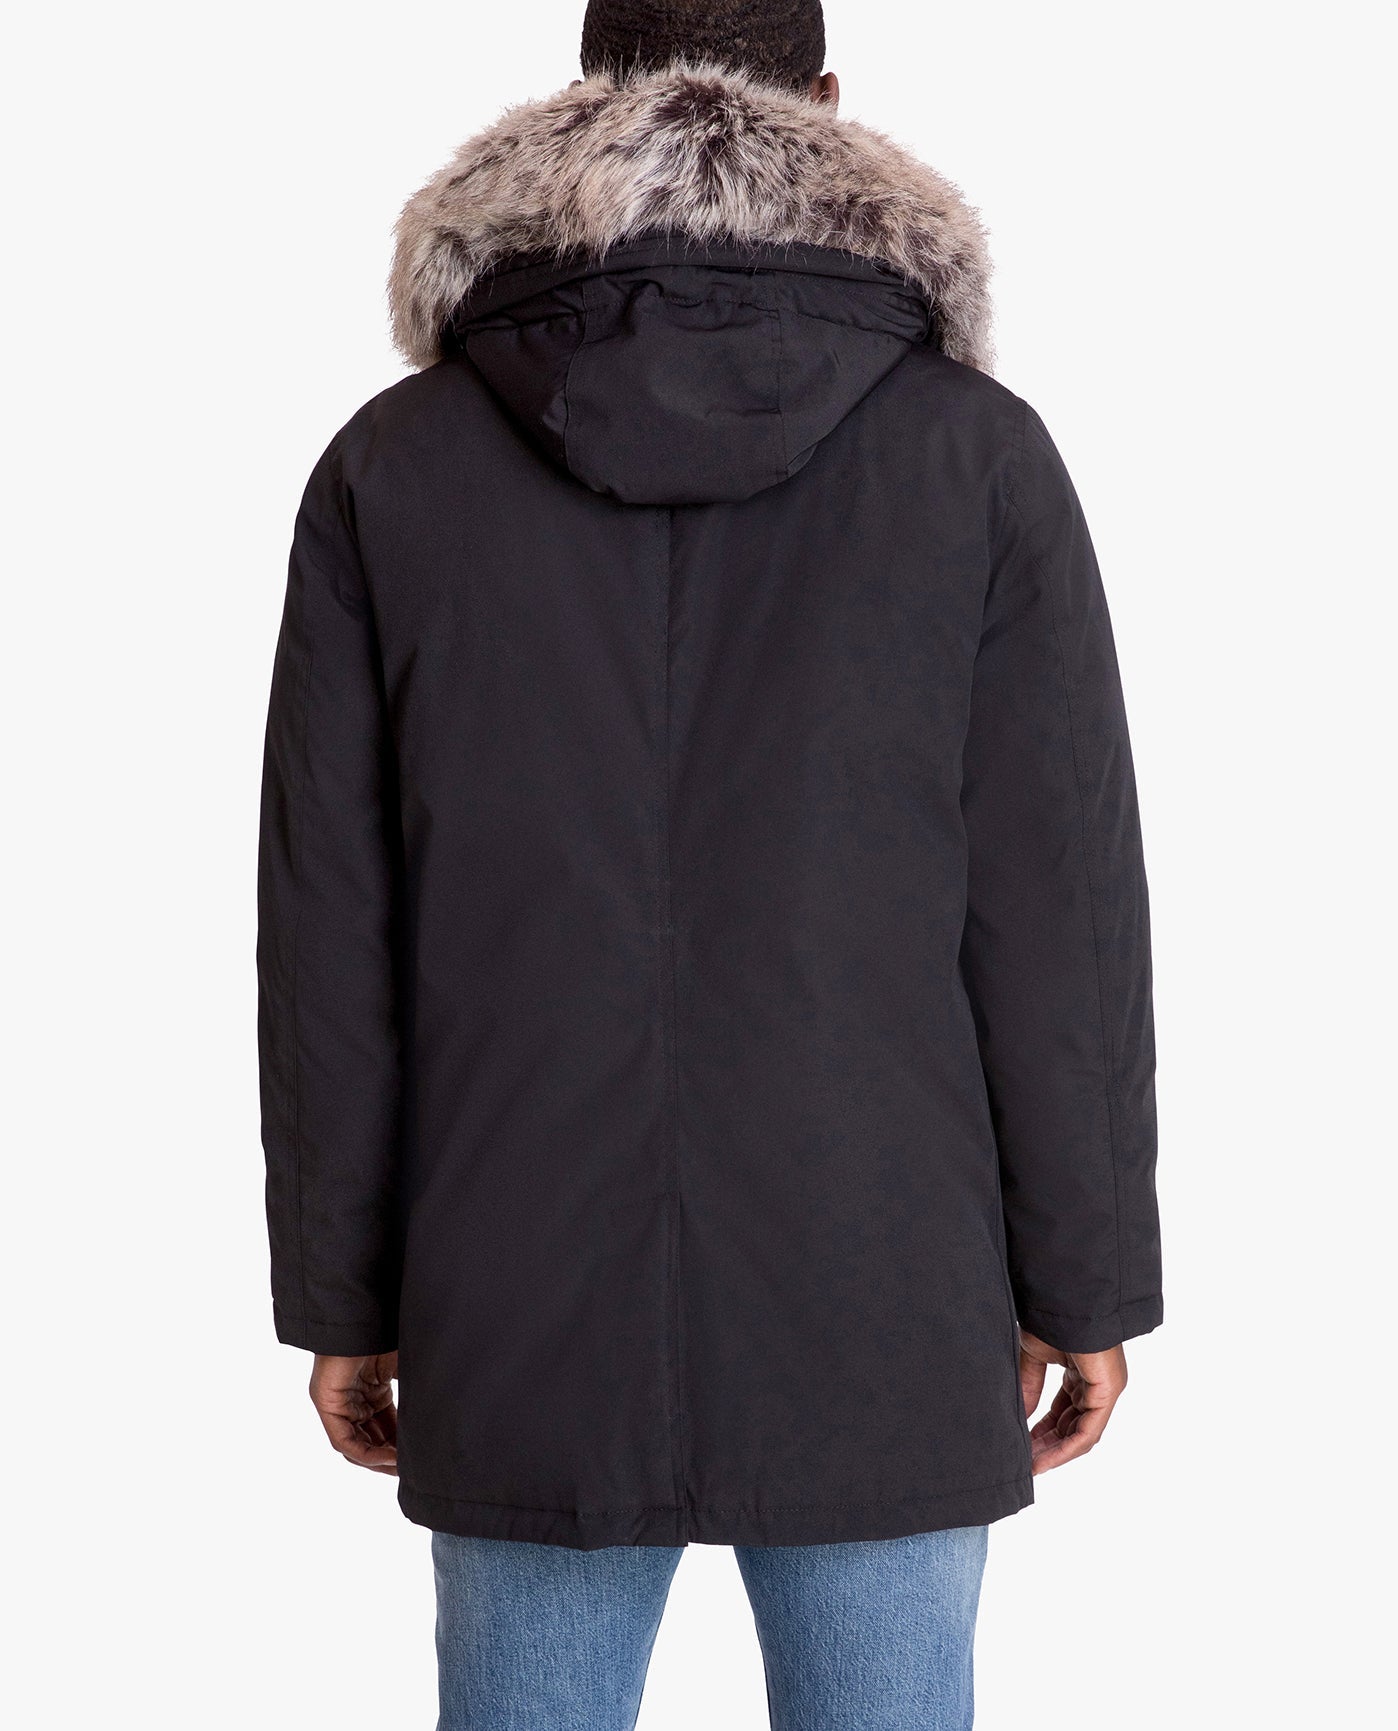 BACK VIEW OF ARTIC PARKA WITH REMOVABLE FAUX FUR TRIMMED HOOD | BLACK